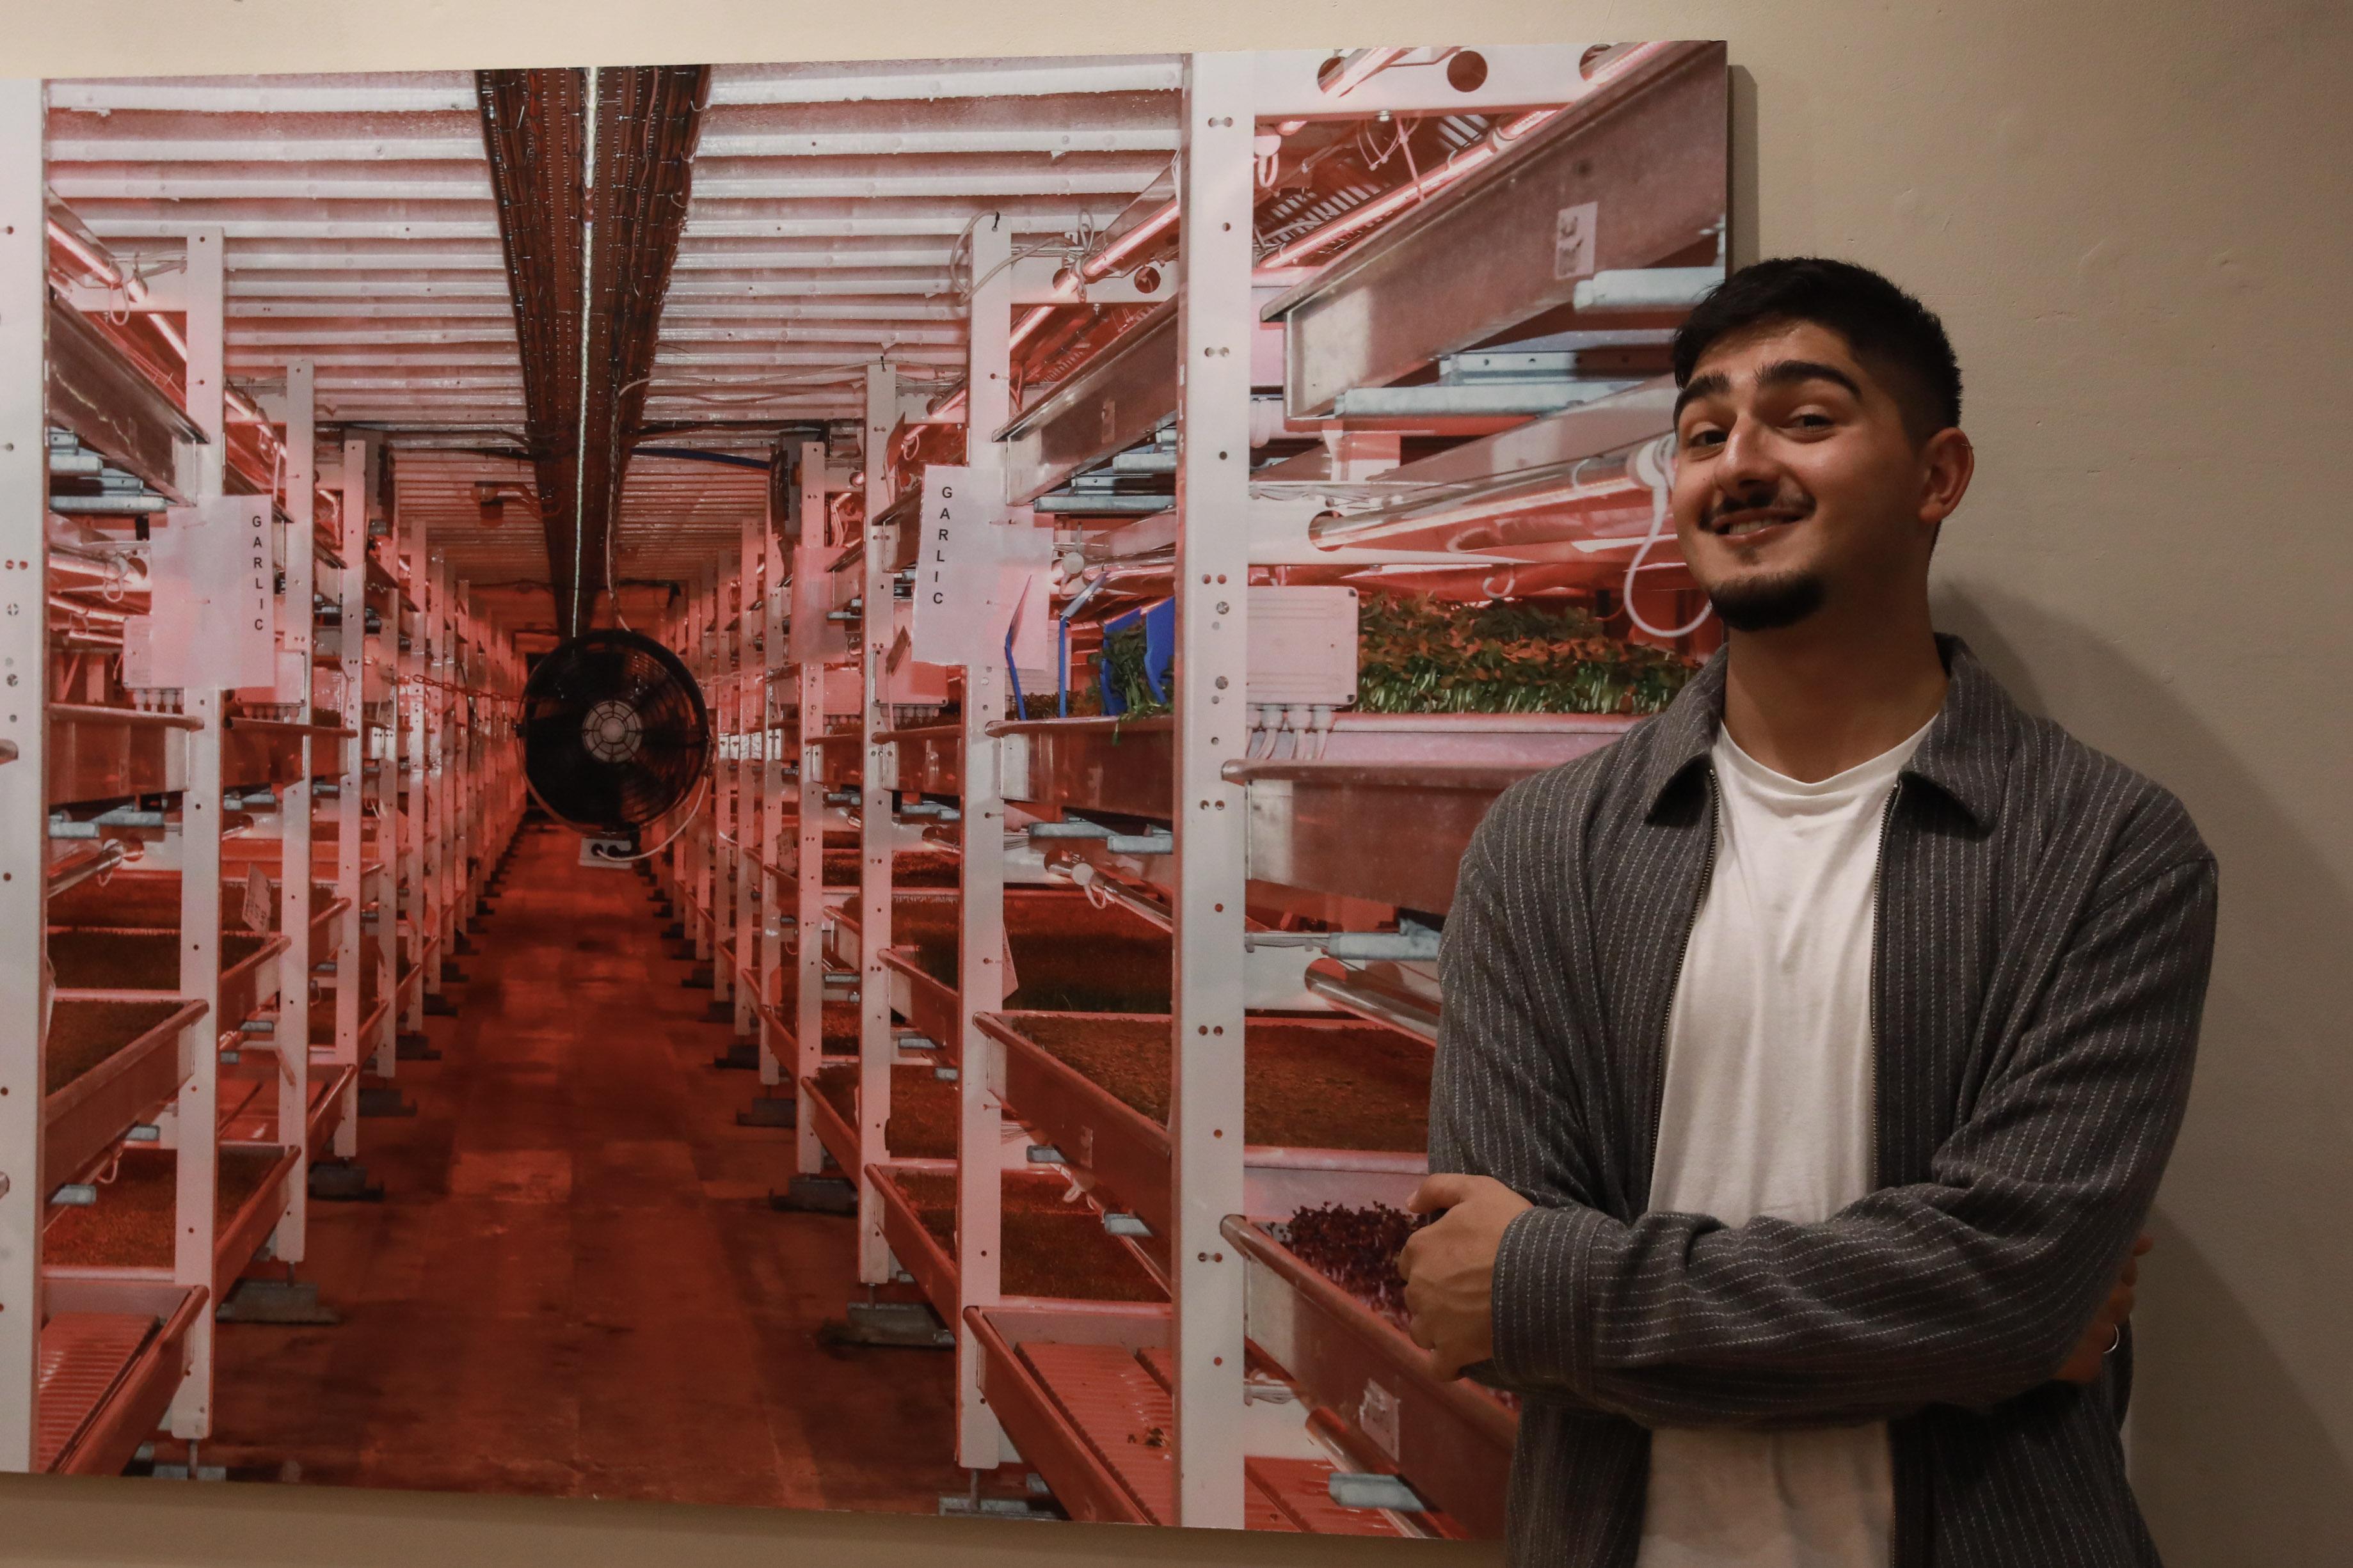 Jai Toor pictured with his photographic work, "The Future of Farming".